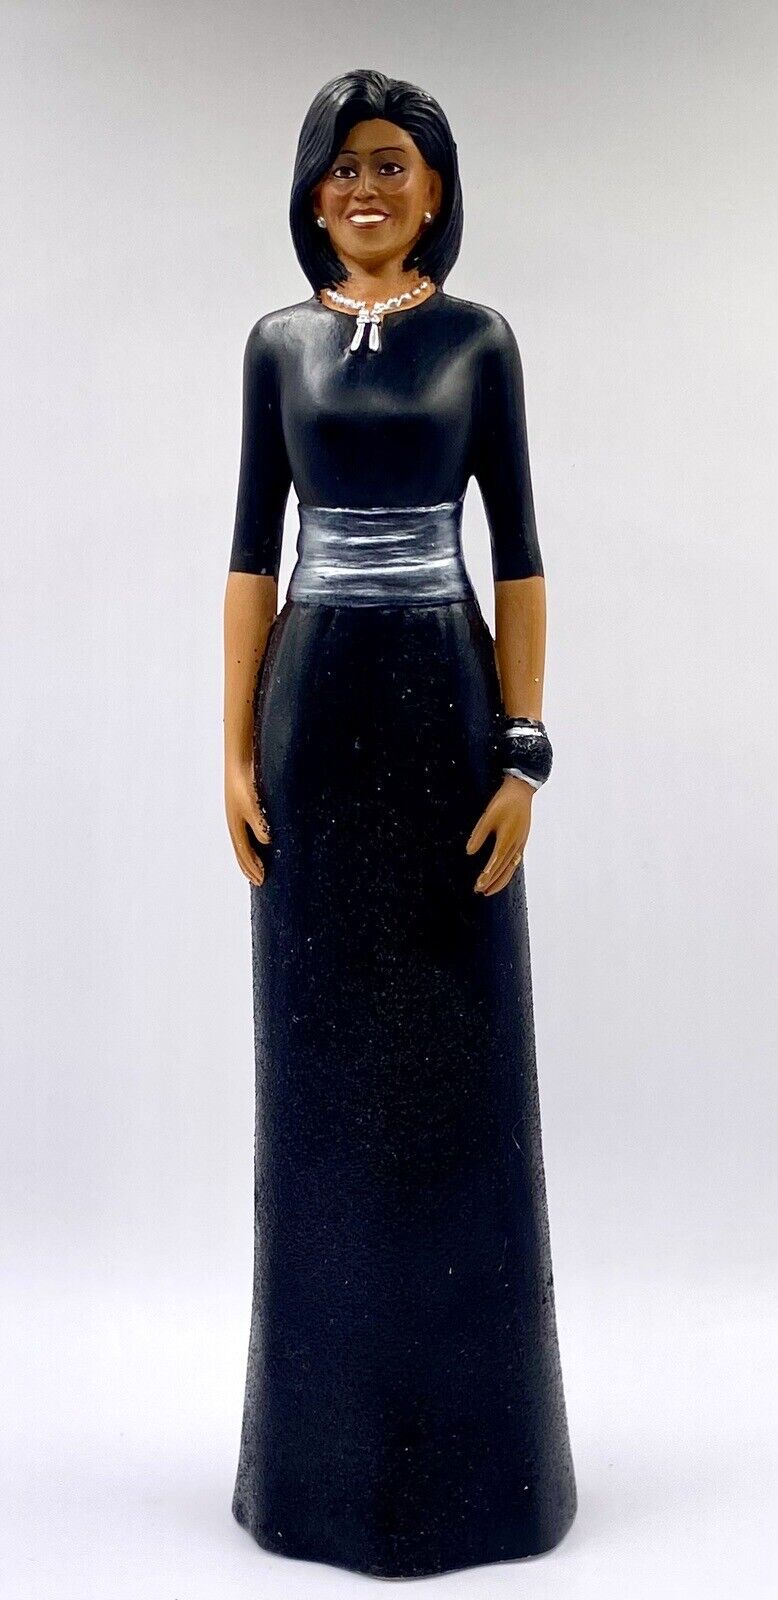 “Regal Beauty” Michelle Obama Sculpture From the Hamilton Collection.